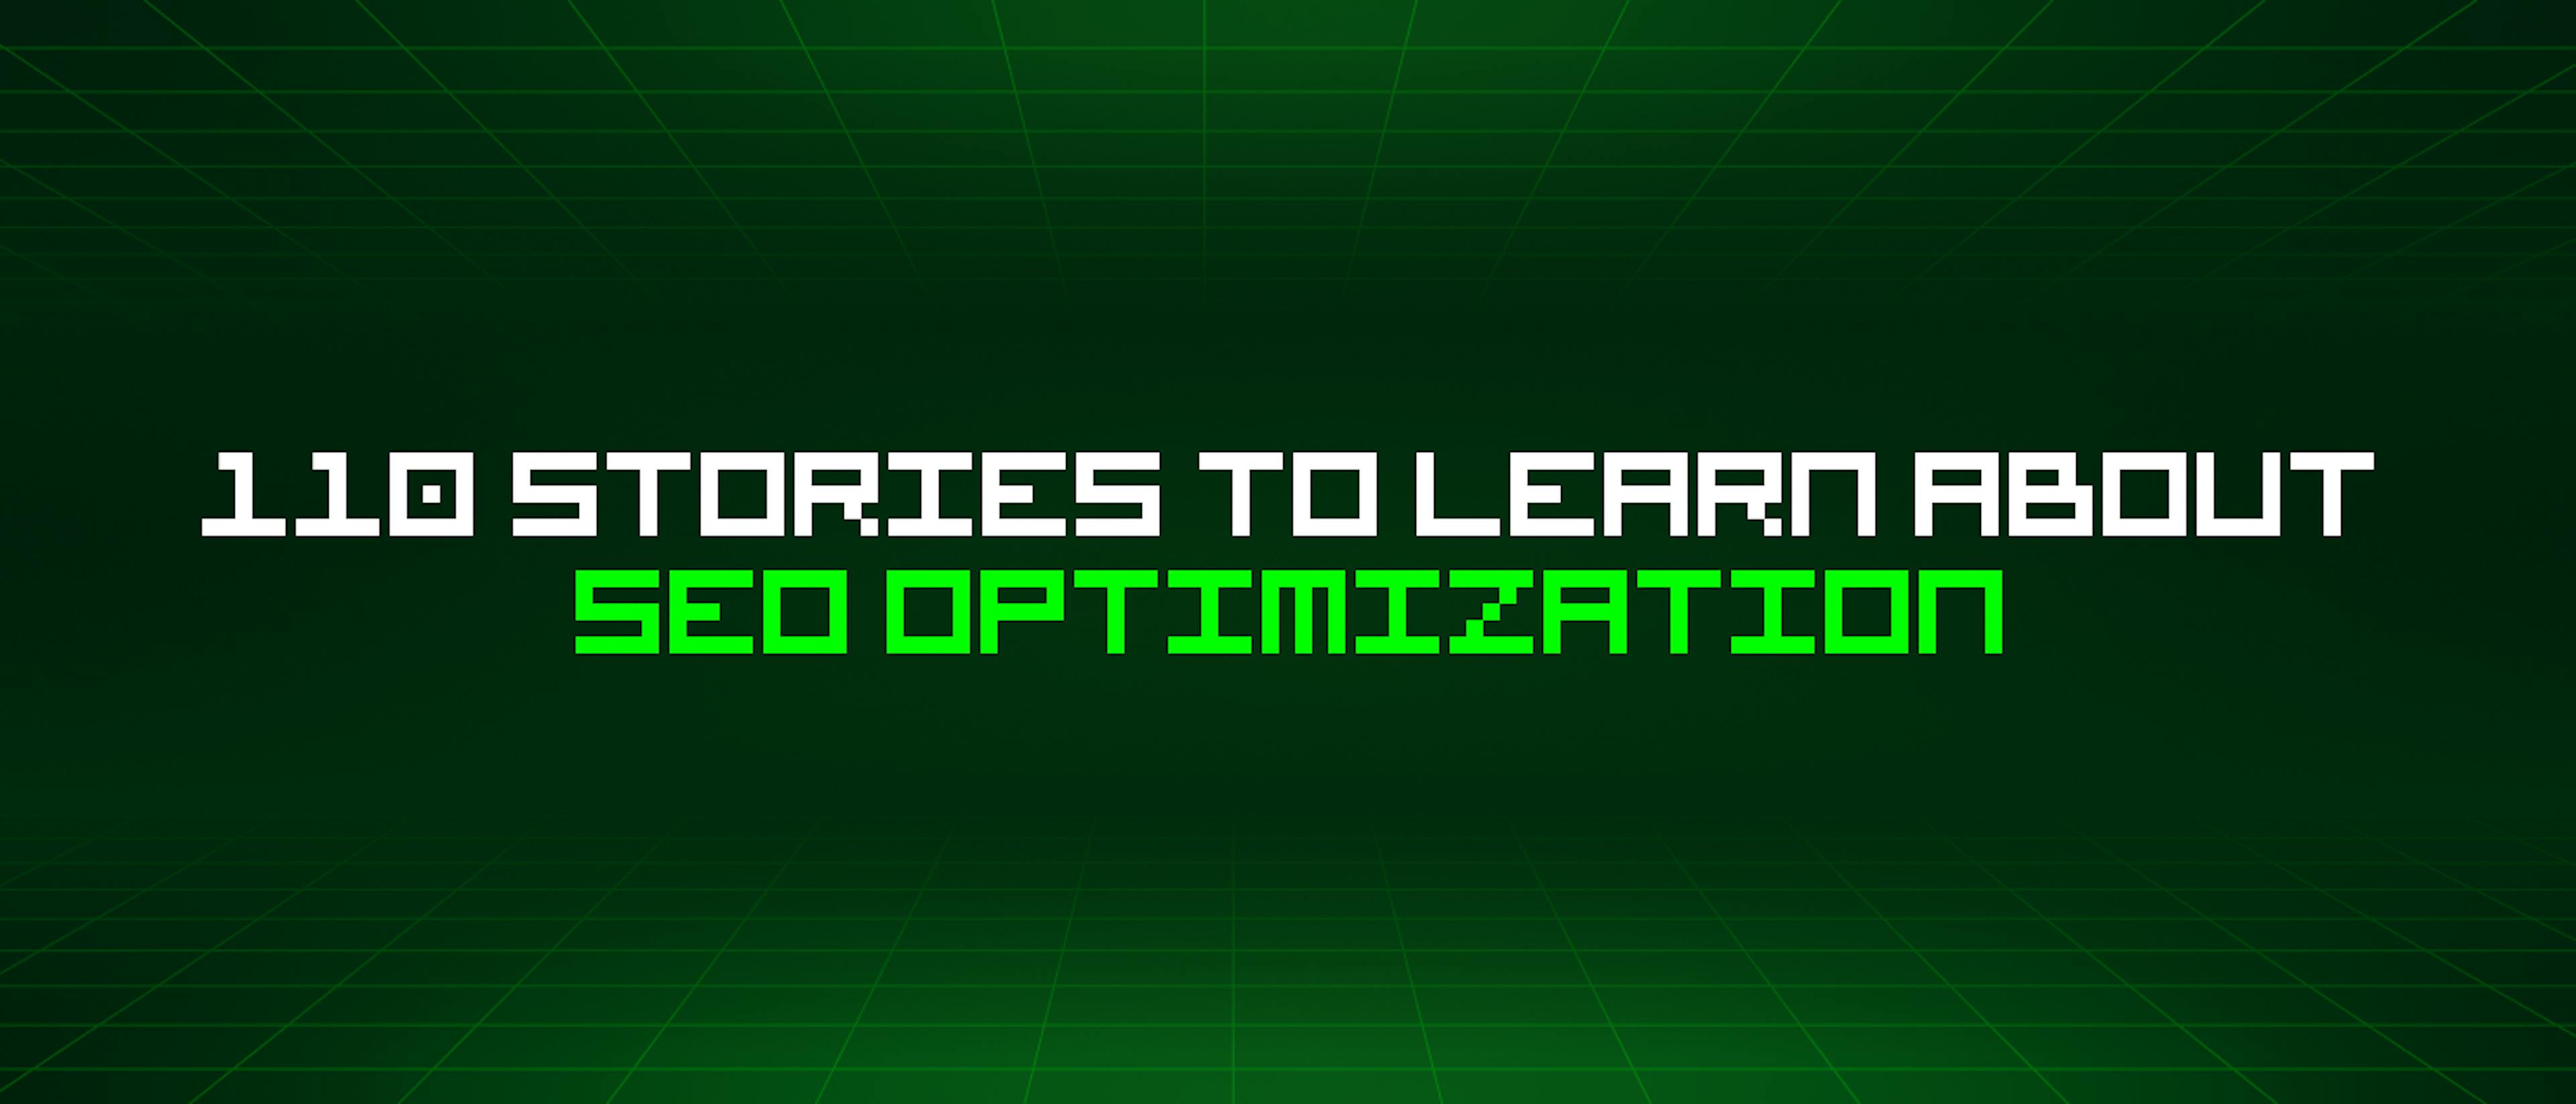 featured image - 110 Stories To Learn About Seo Optimization